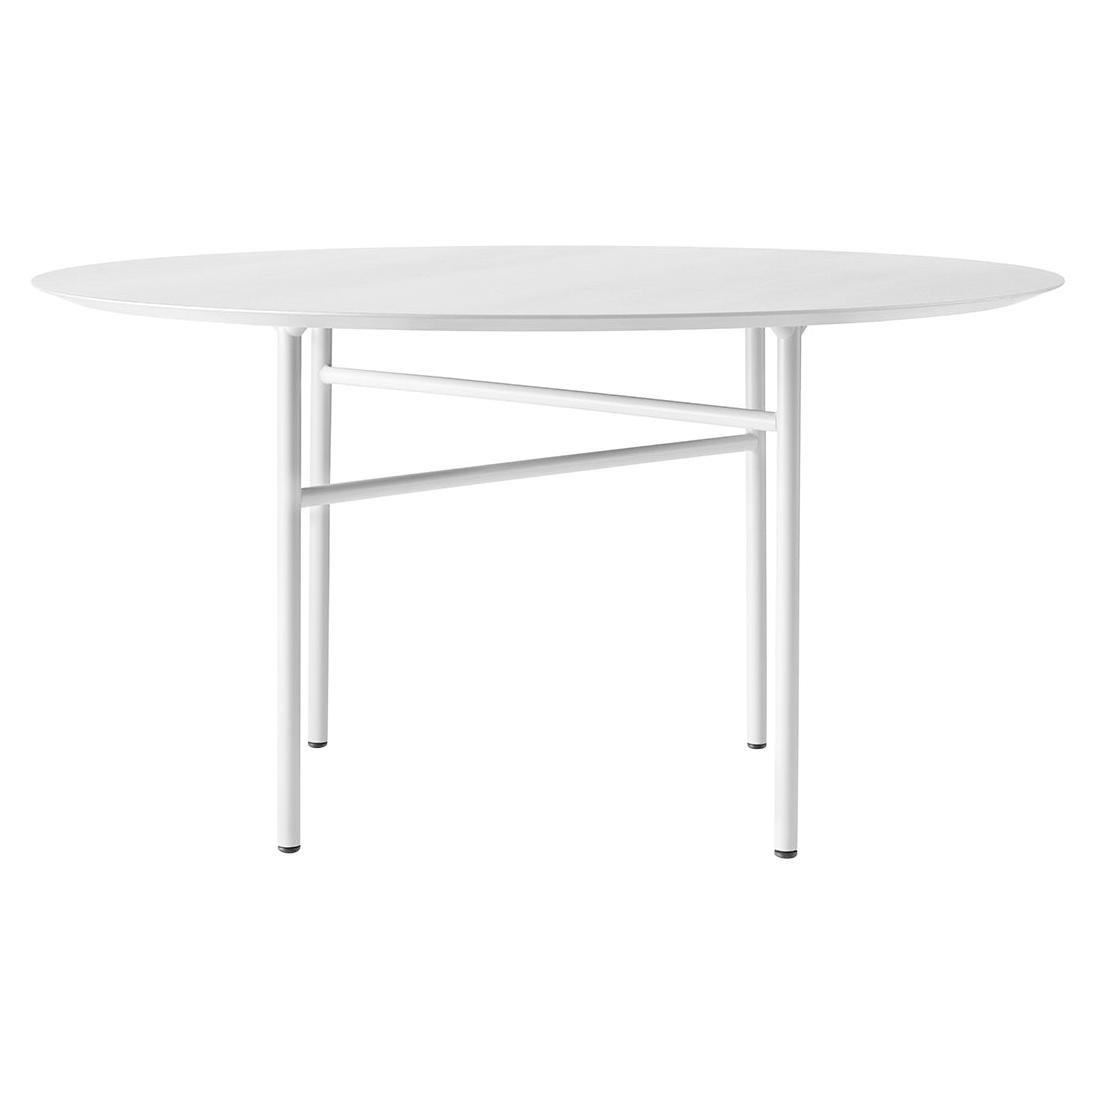 Snaregade Table, 54" Table Top in Light Grey Veneer For Sale